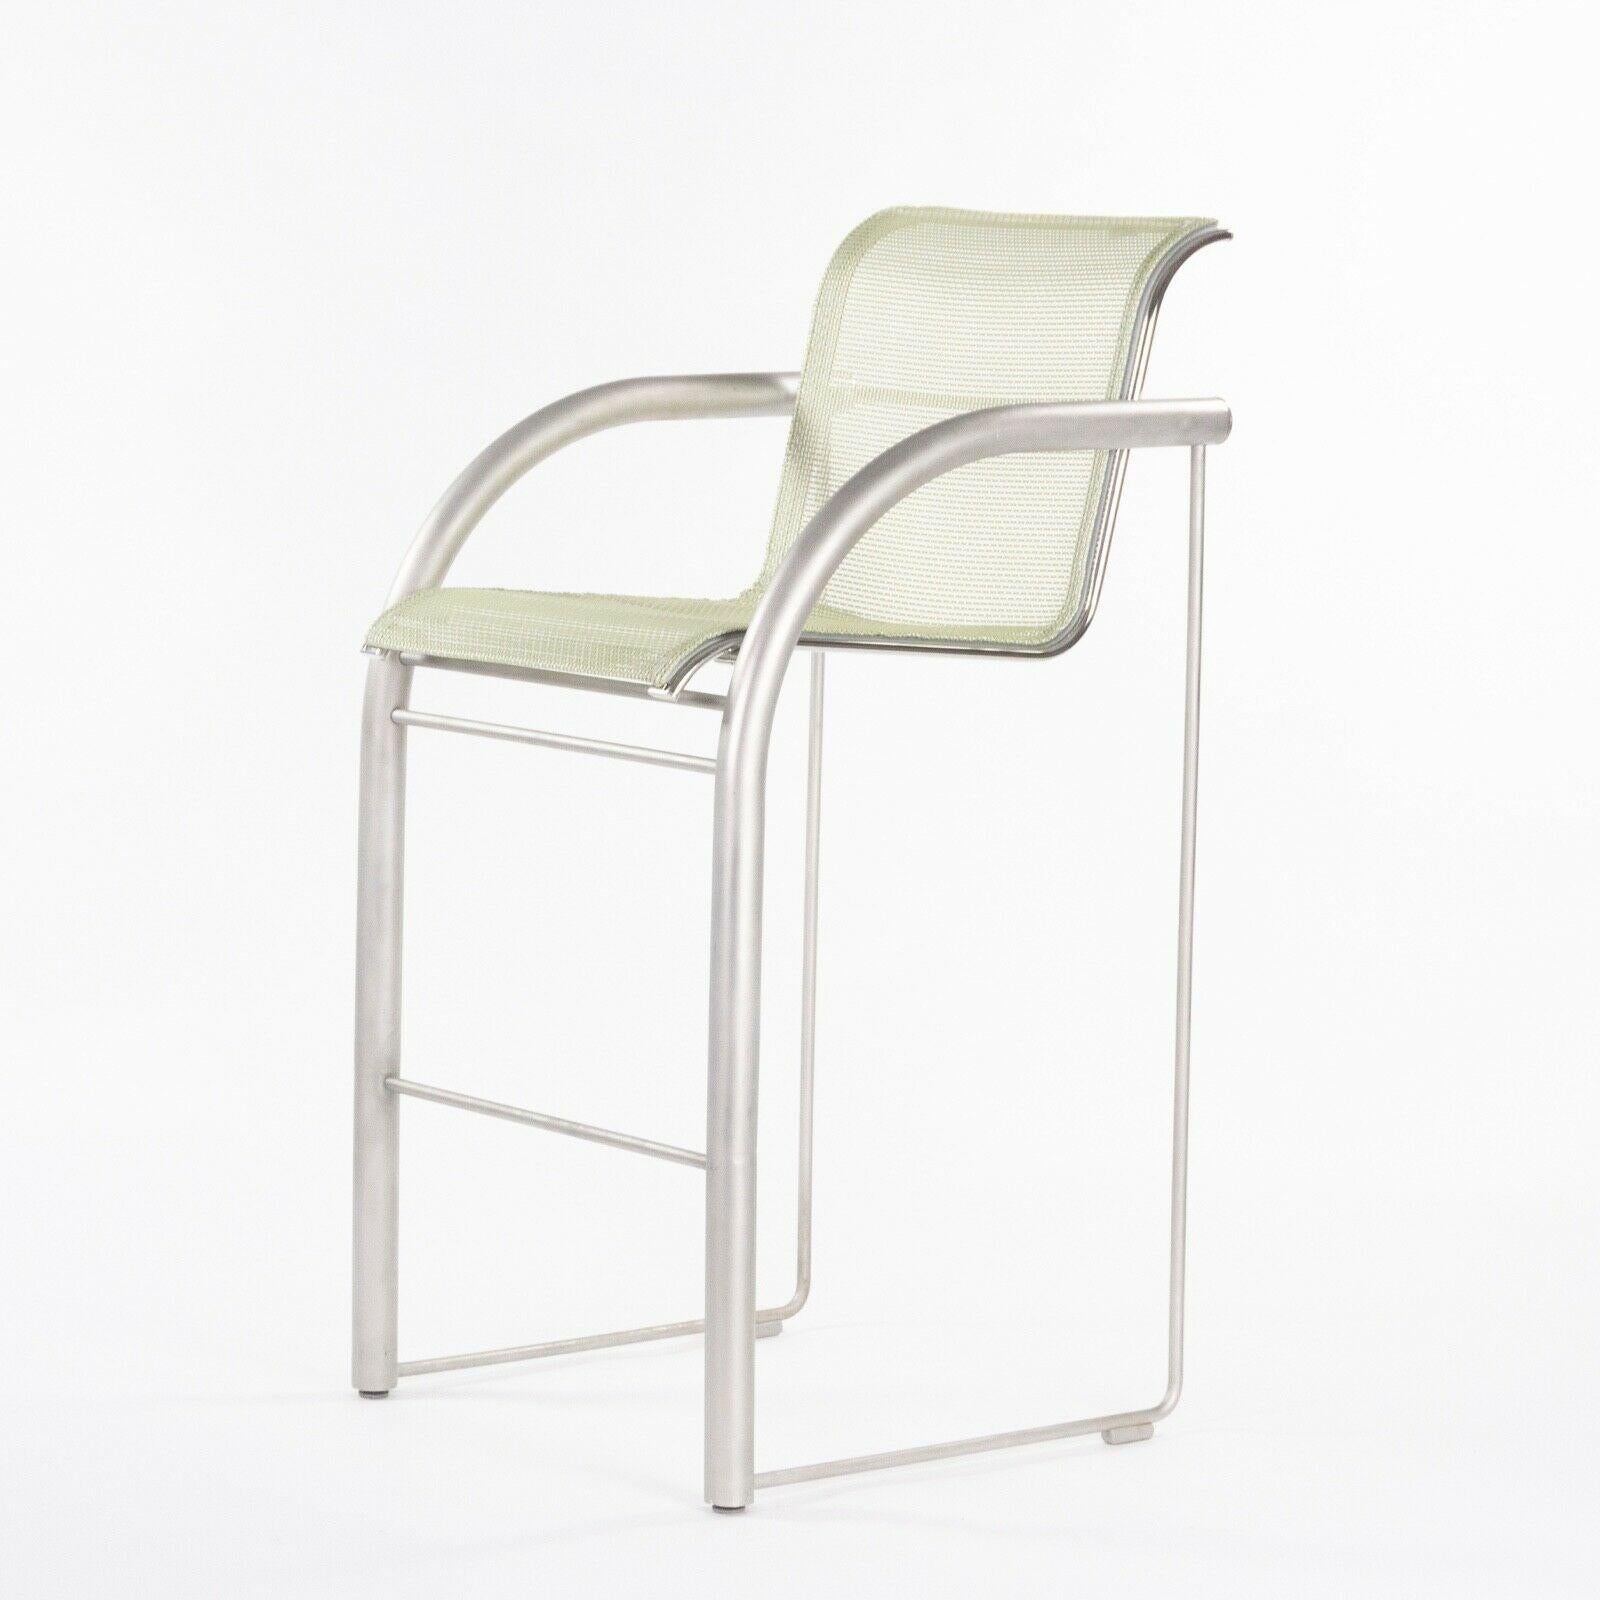 Listed for sale is a Richard Schultz 2002 Collection stainless steel bar stool prototype with outdoor mesh upholstery. For context a 2002 collection bar stool was never put into production, thus, this is a complete one-off. The arm height is 38